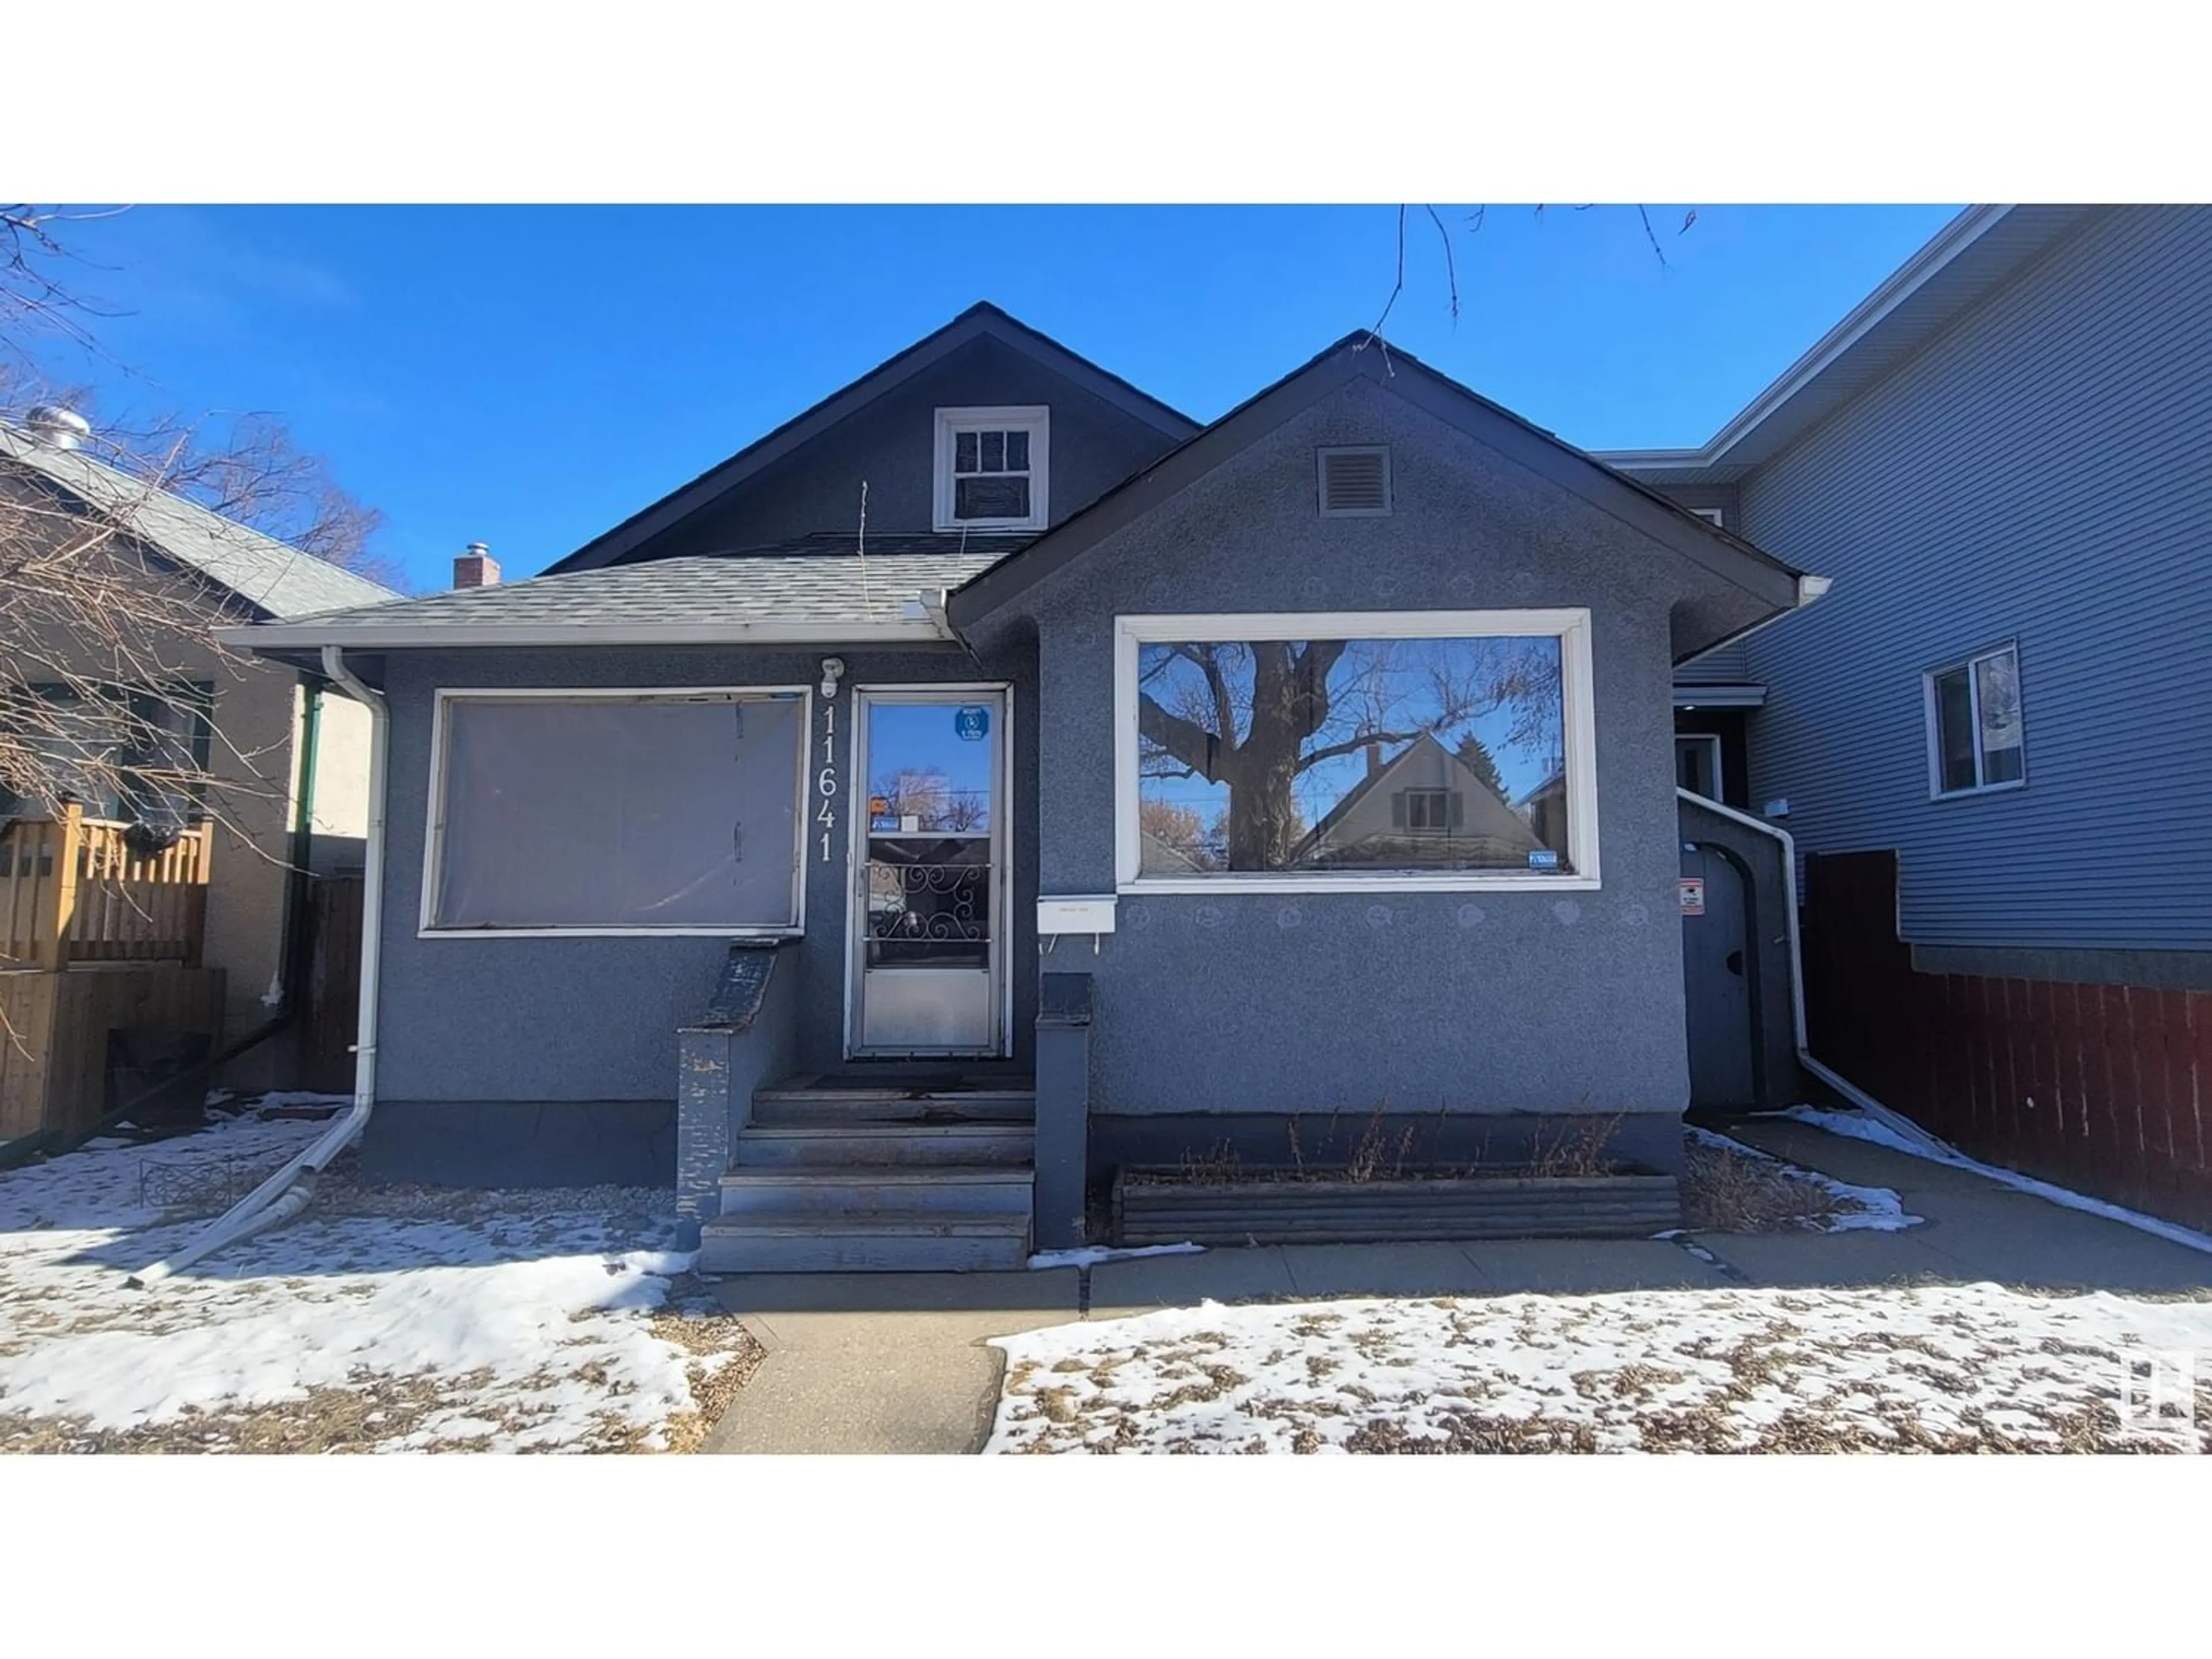 Frontside or backside of a home for 11641 92 ST NW, Edmonton Alberta T5G1A1